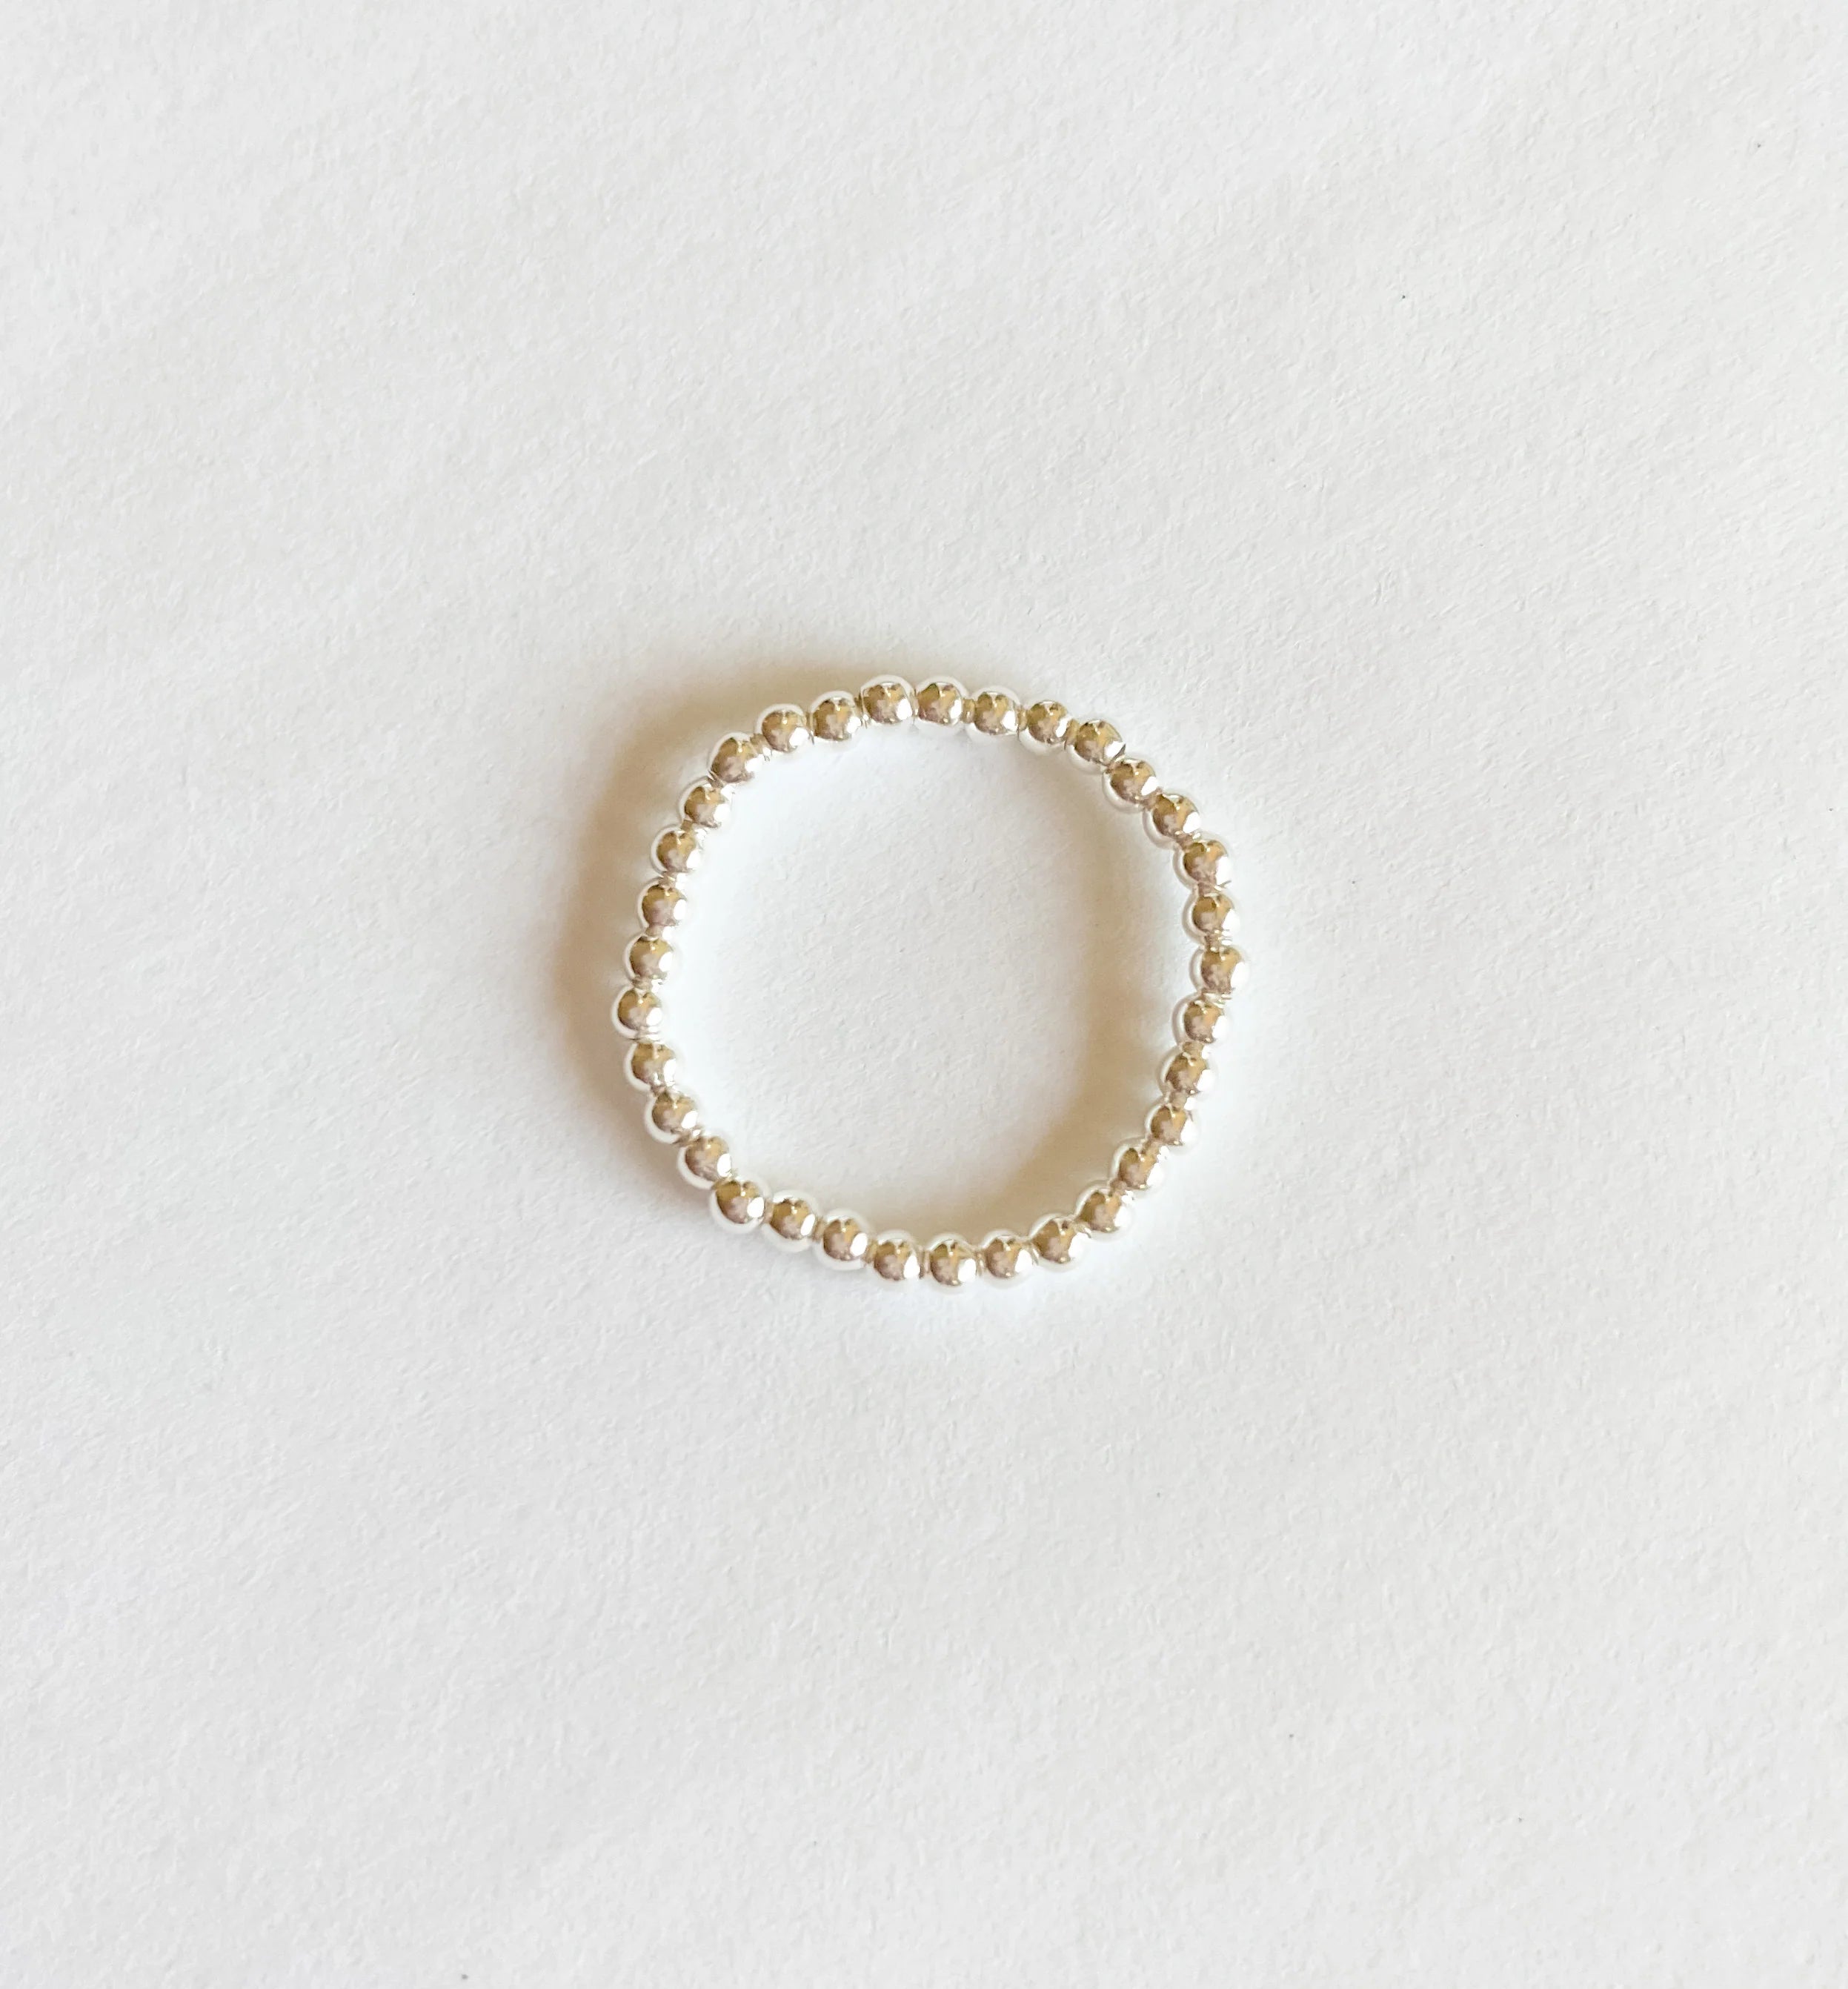 Beaded Blondes | Lexi 2MM Beaded Band Ring in Silver - Giddy Up Glamour Boutique